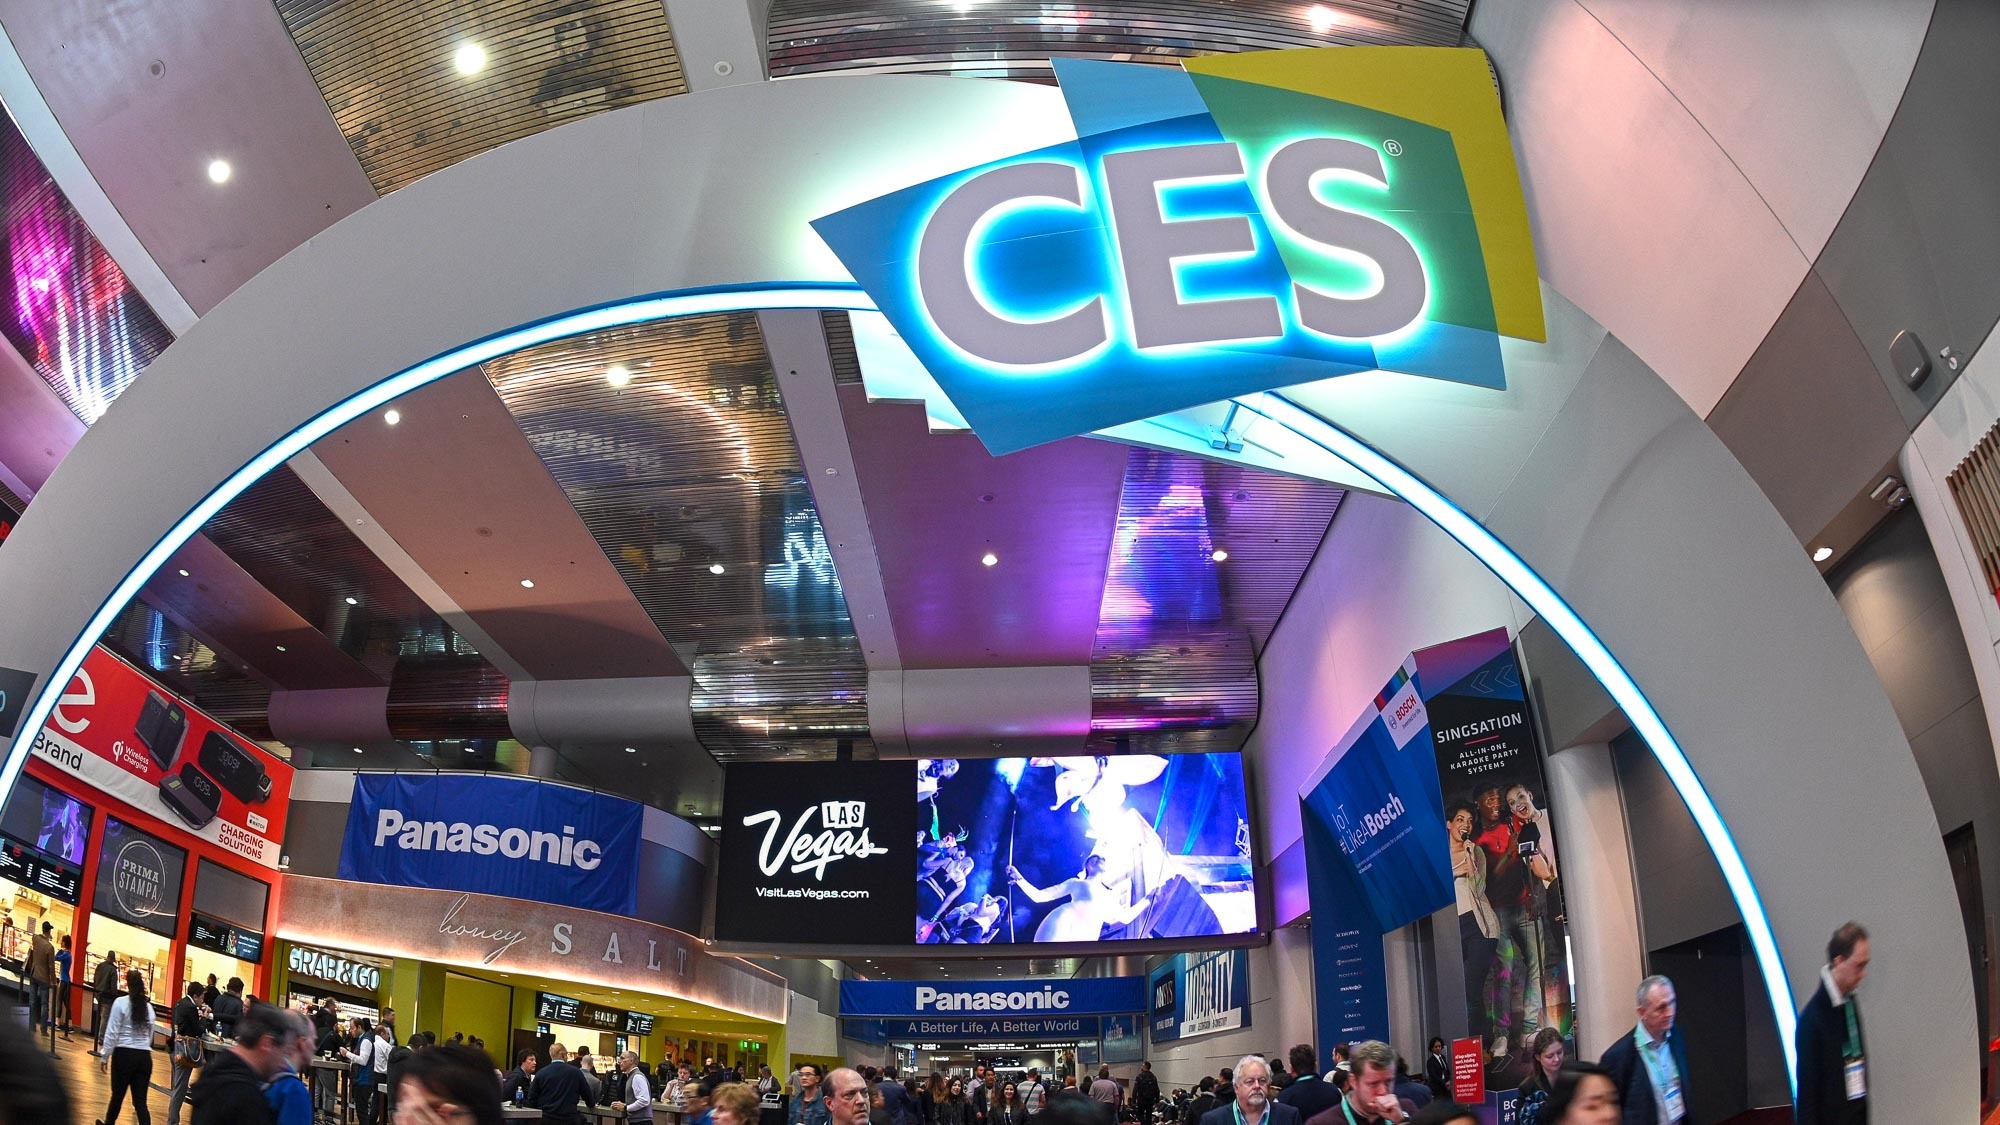 A show on state-of-the-art tech at Consumer Electronics Show 2022